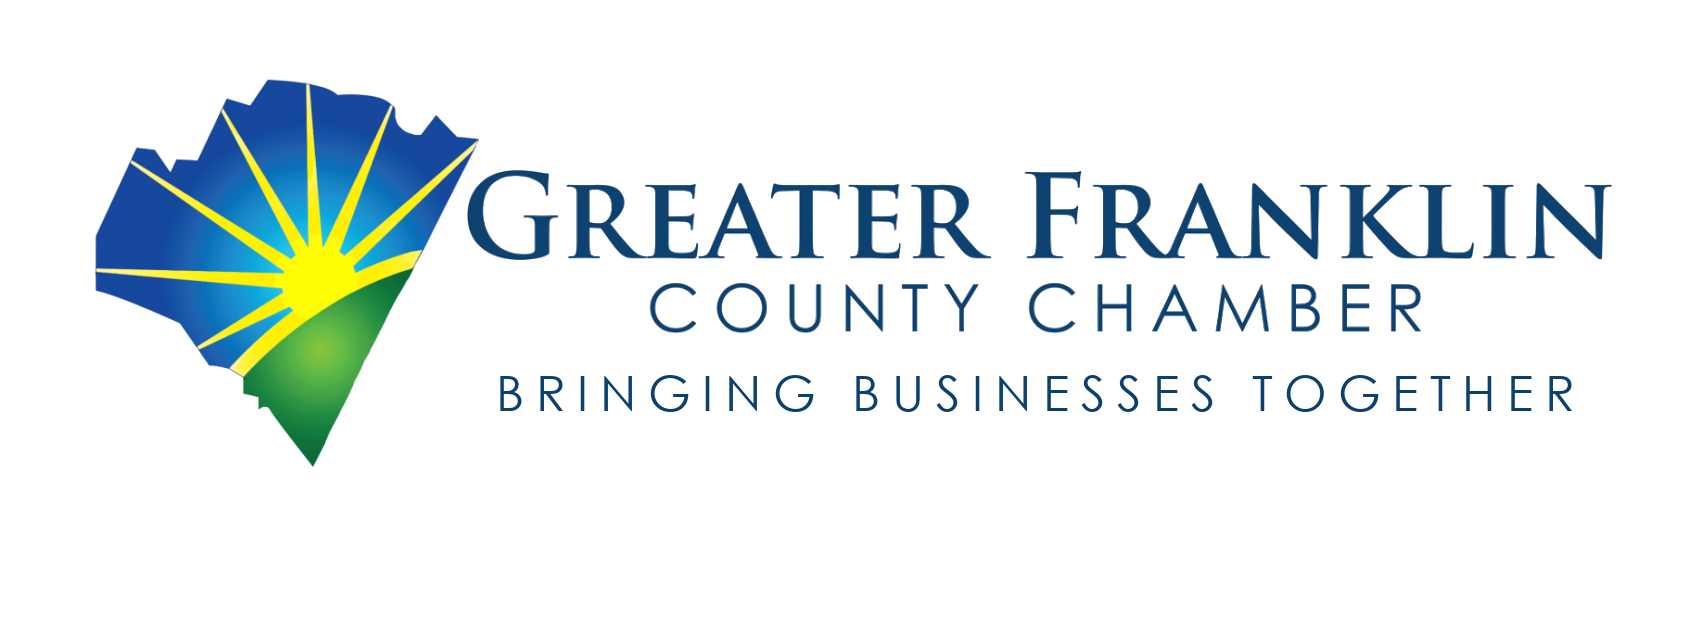 Greater Franklin County Chamber logo